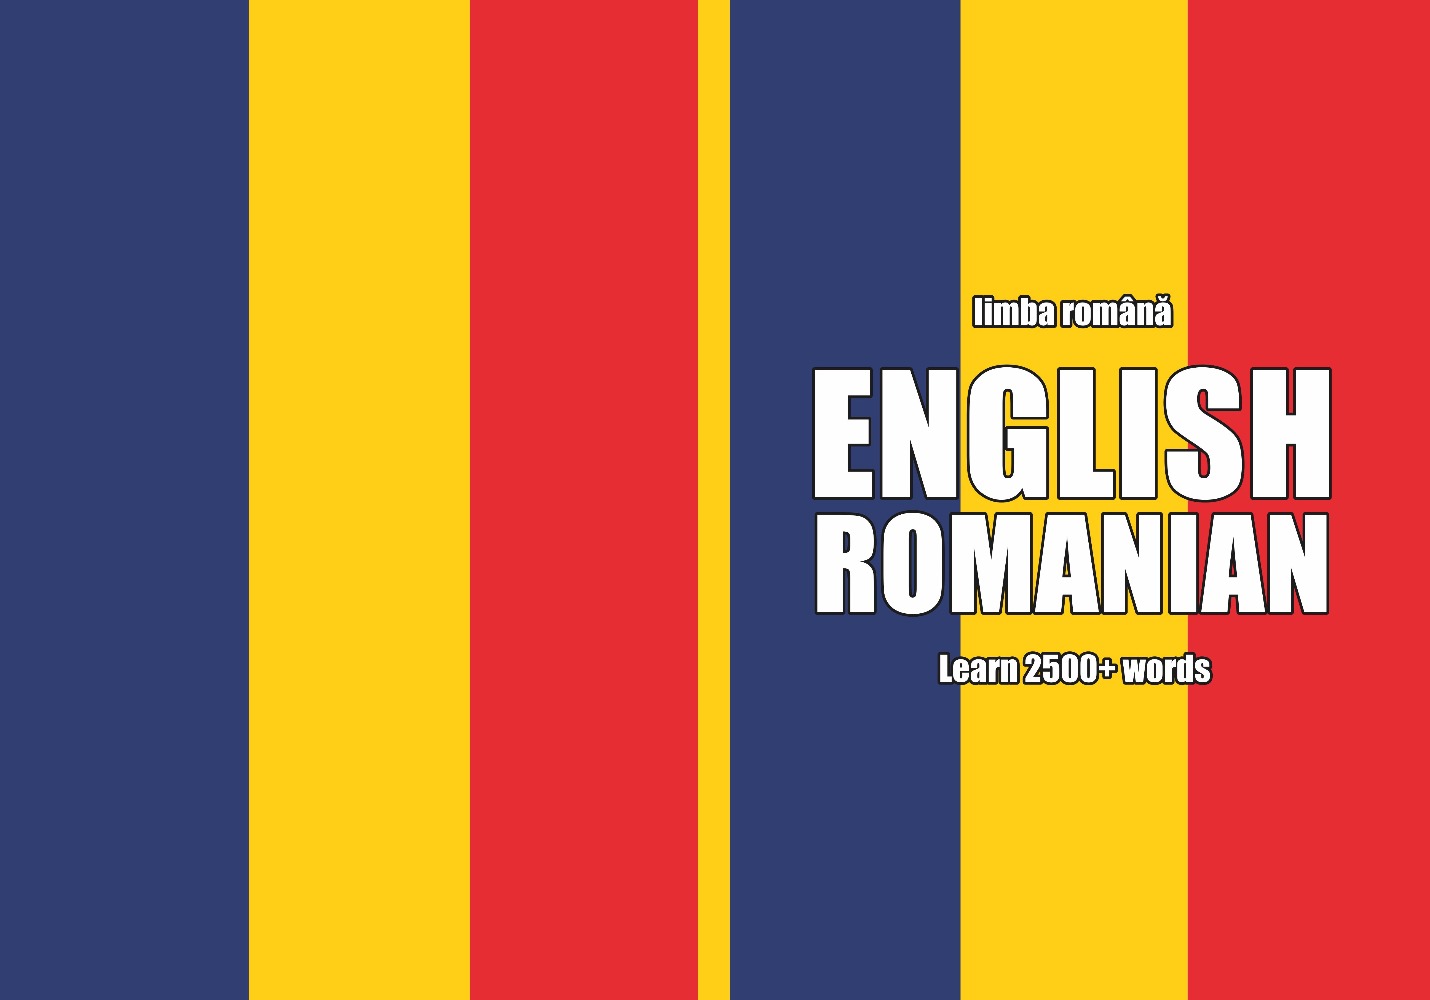 Romanian language learning notebook cover